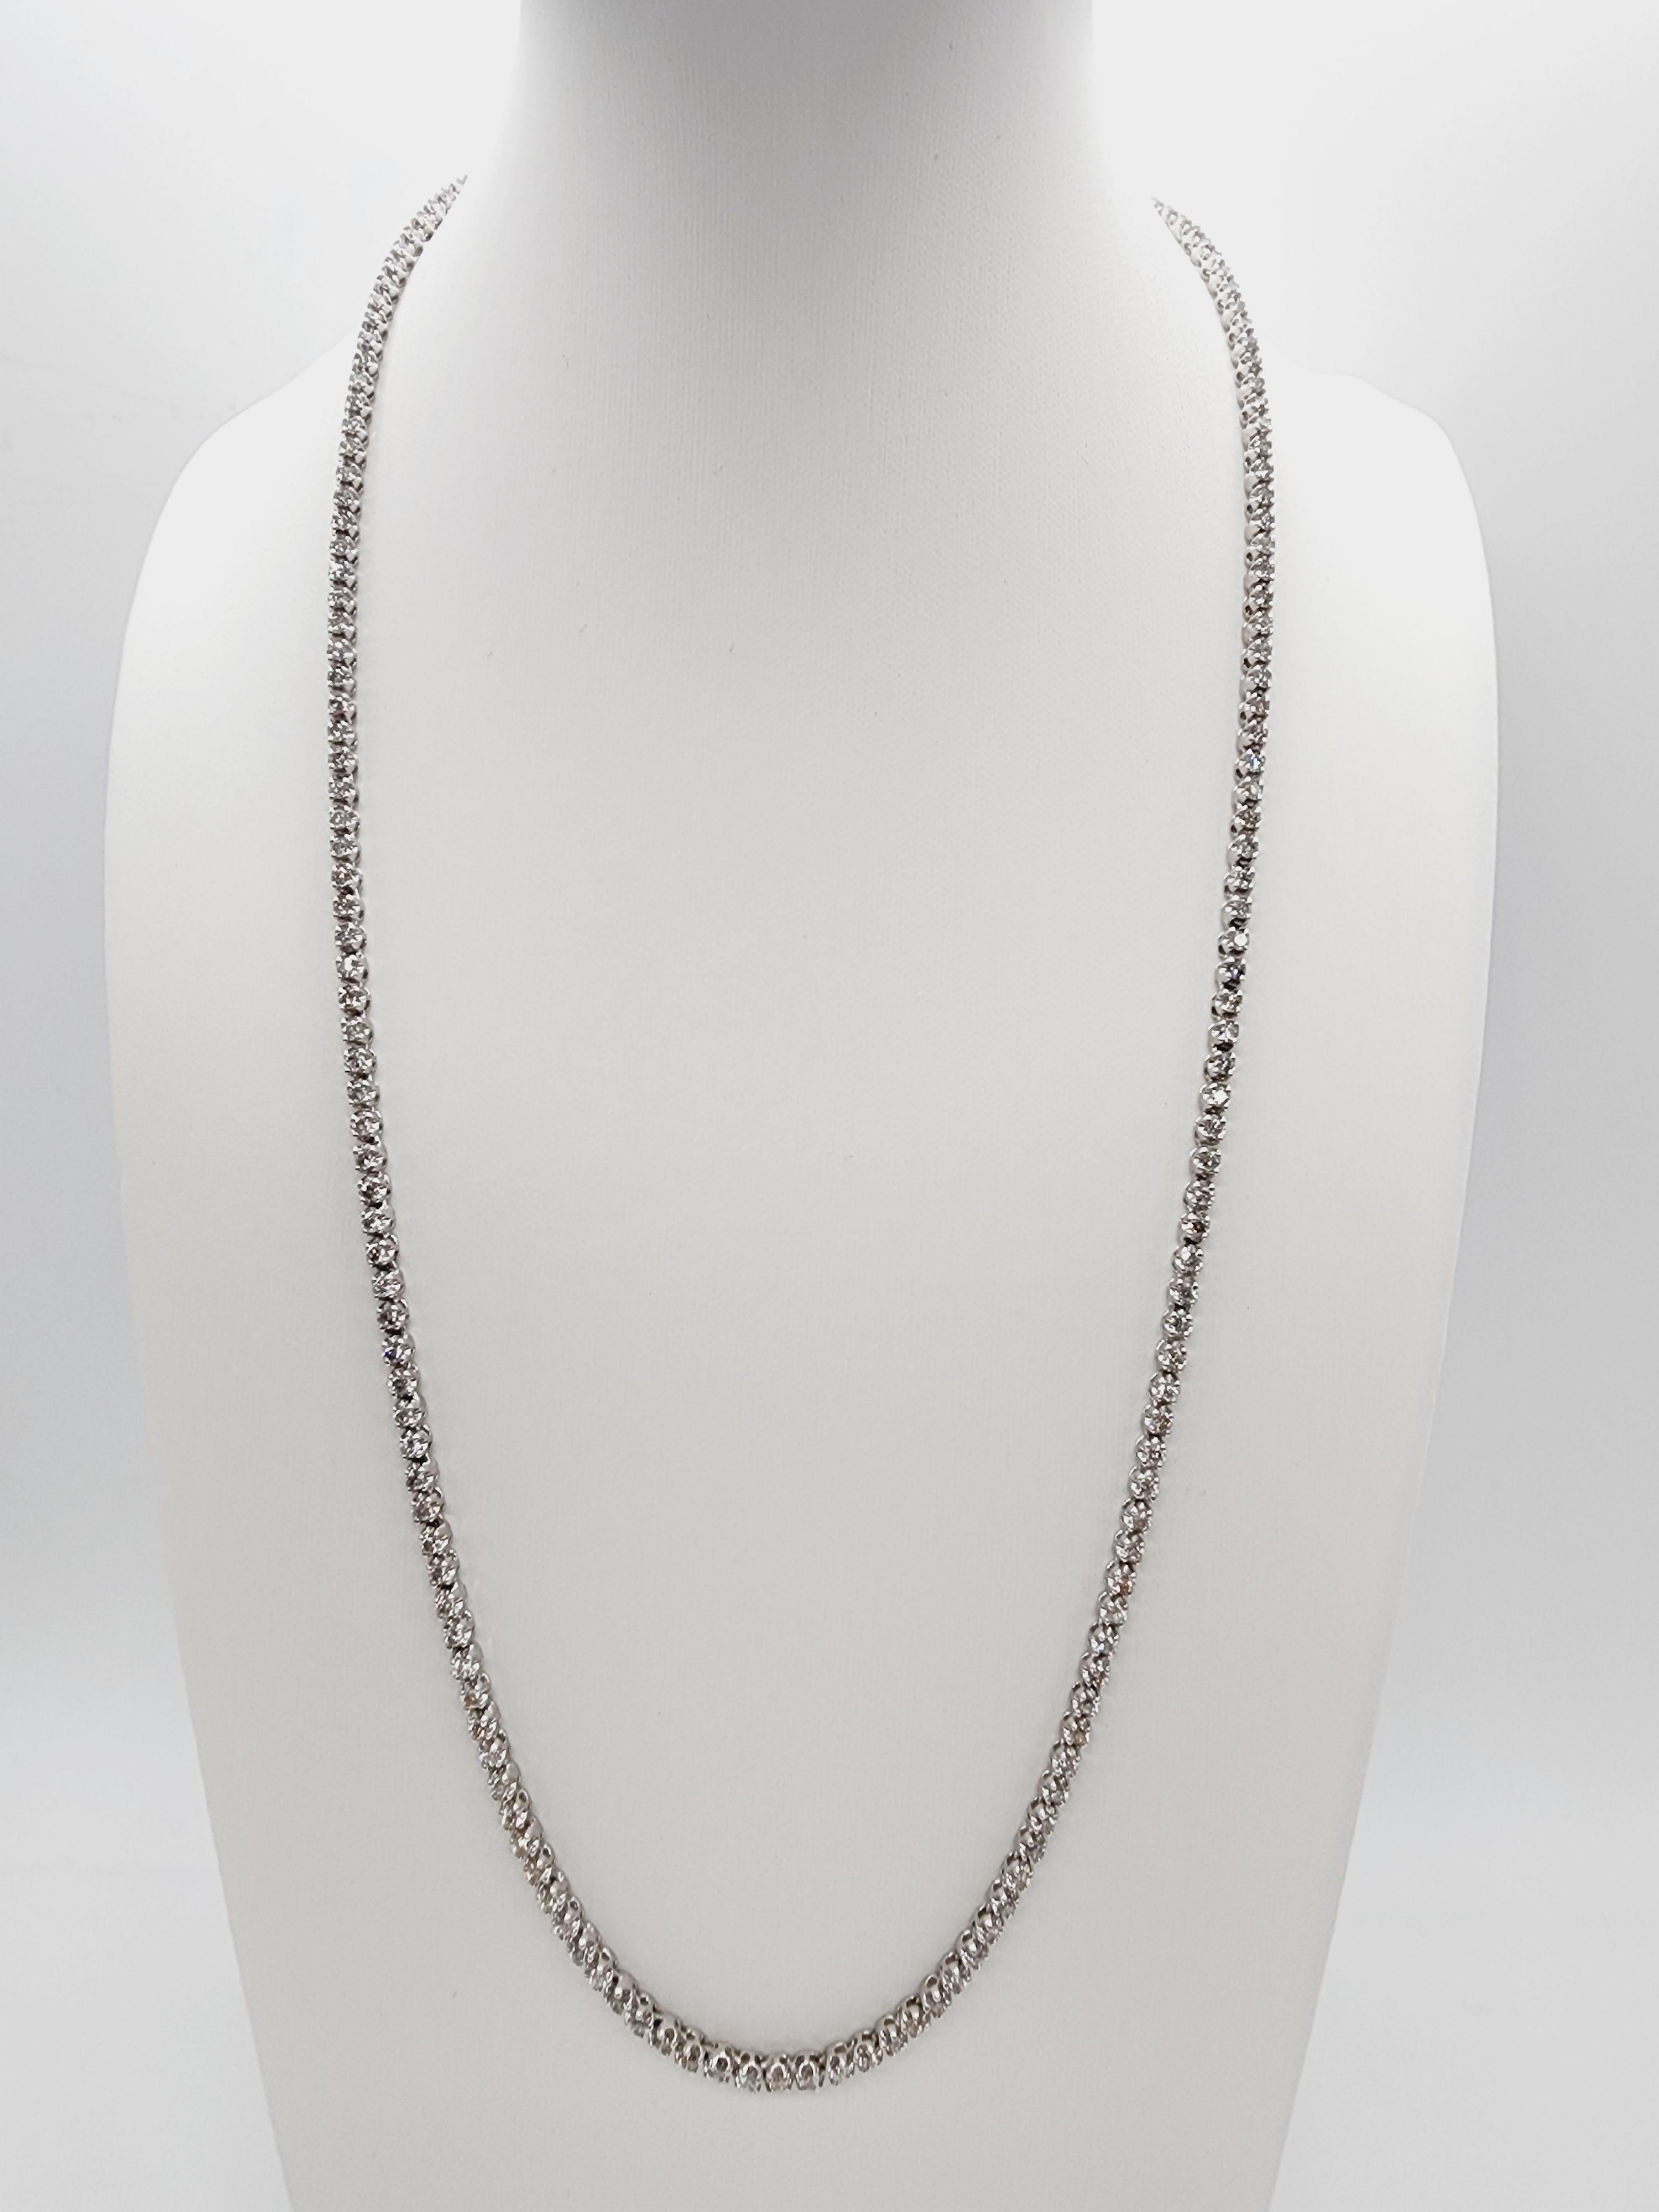 Brilliant and beautiful buttercup necklace, natural round-brilliant cut white diamonds clean and excellent shine. 14k white gold buttercup setting. 22 inch length. Average H Color, SI Clarity.  2.9 mm wide.

*Free shipping within the U.S.*